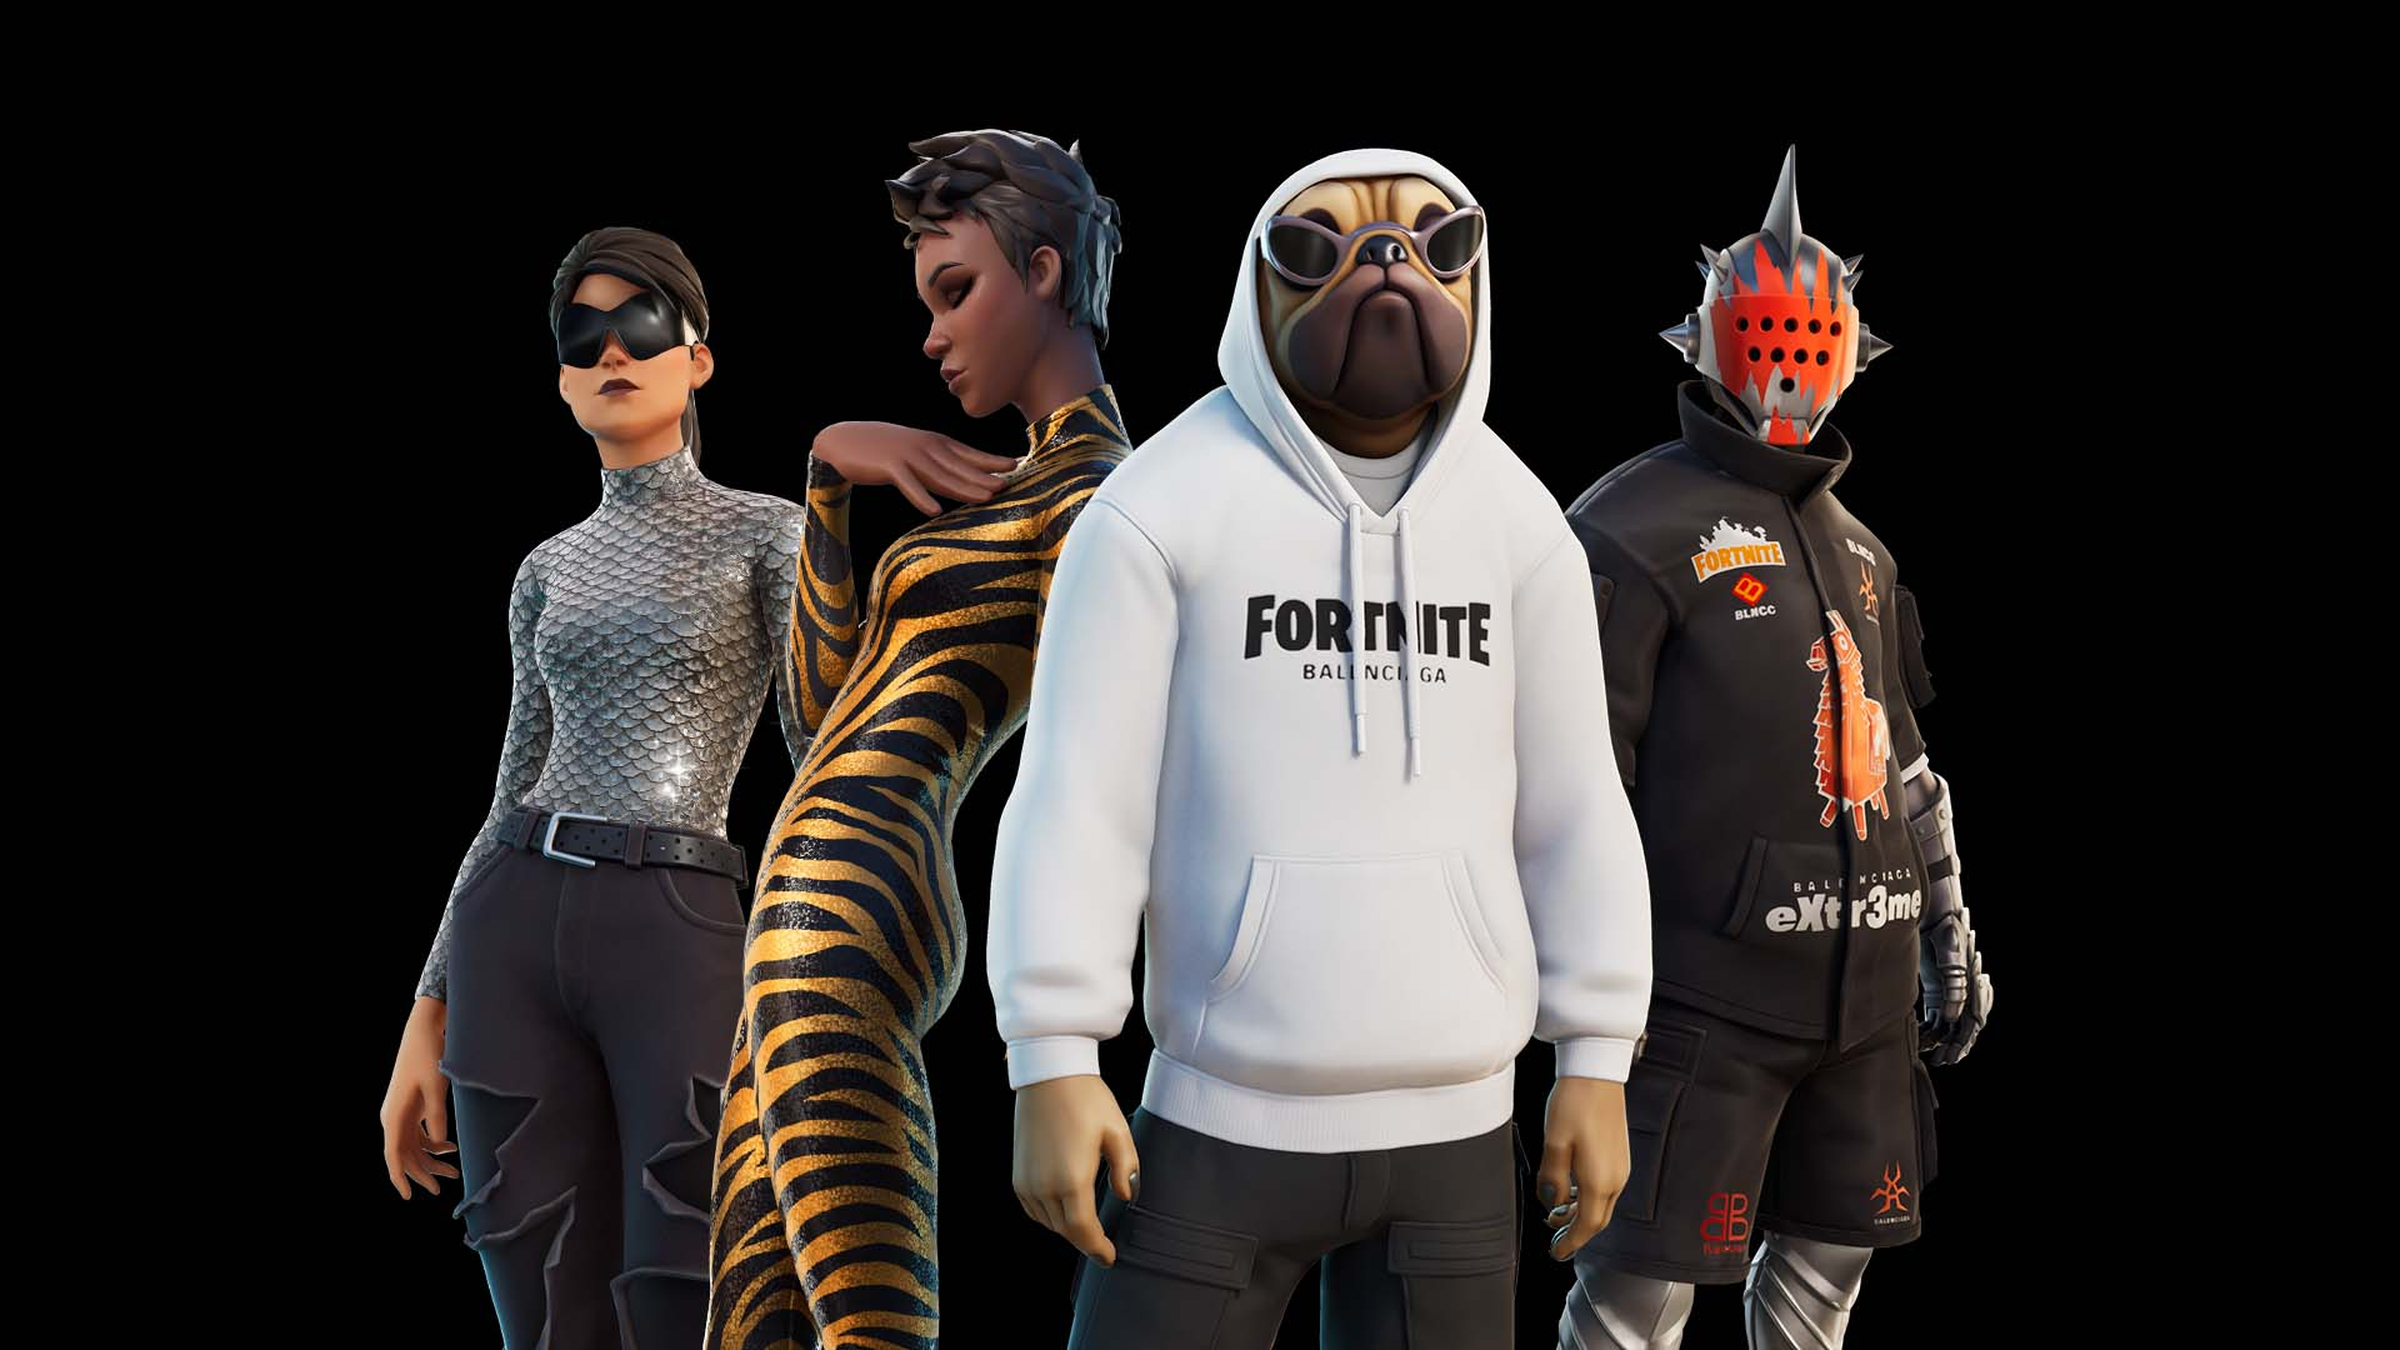 The new Balenciaga-themed skins coming to Fortnite.